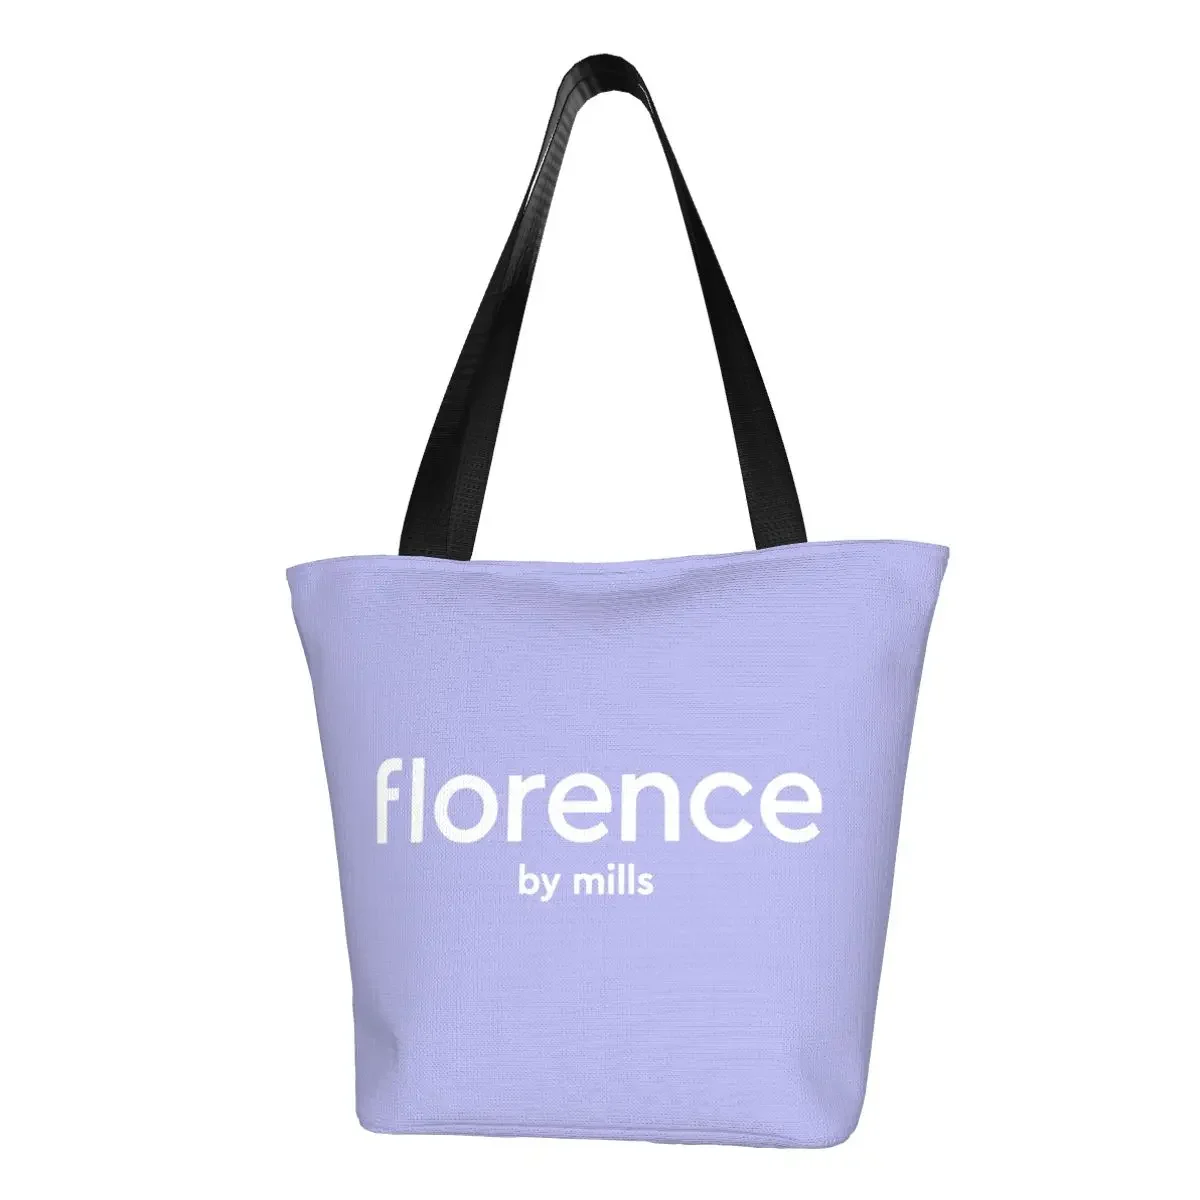 

Florence By Mills Groceries Shopping Bags Funny Printing Canvas Shopper Shoulder Tote Bags Large Capacity Portable Handbag